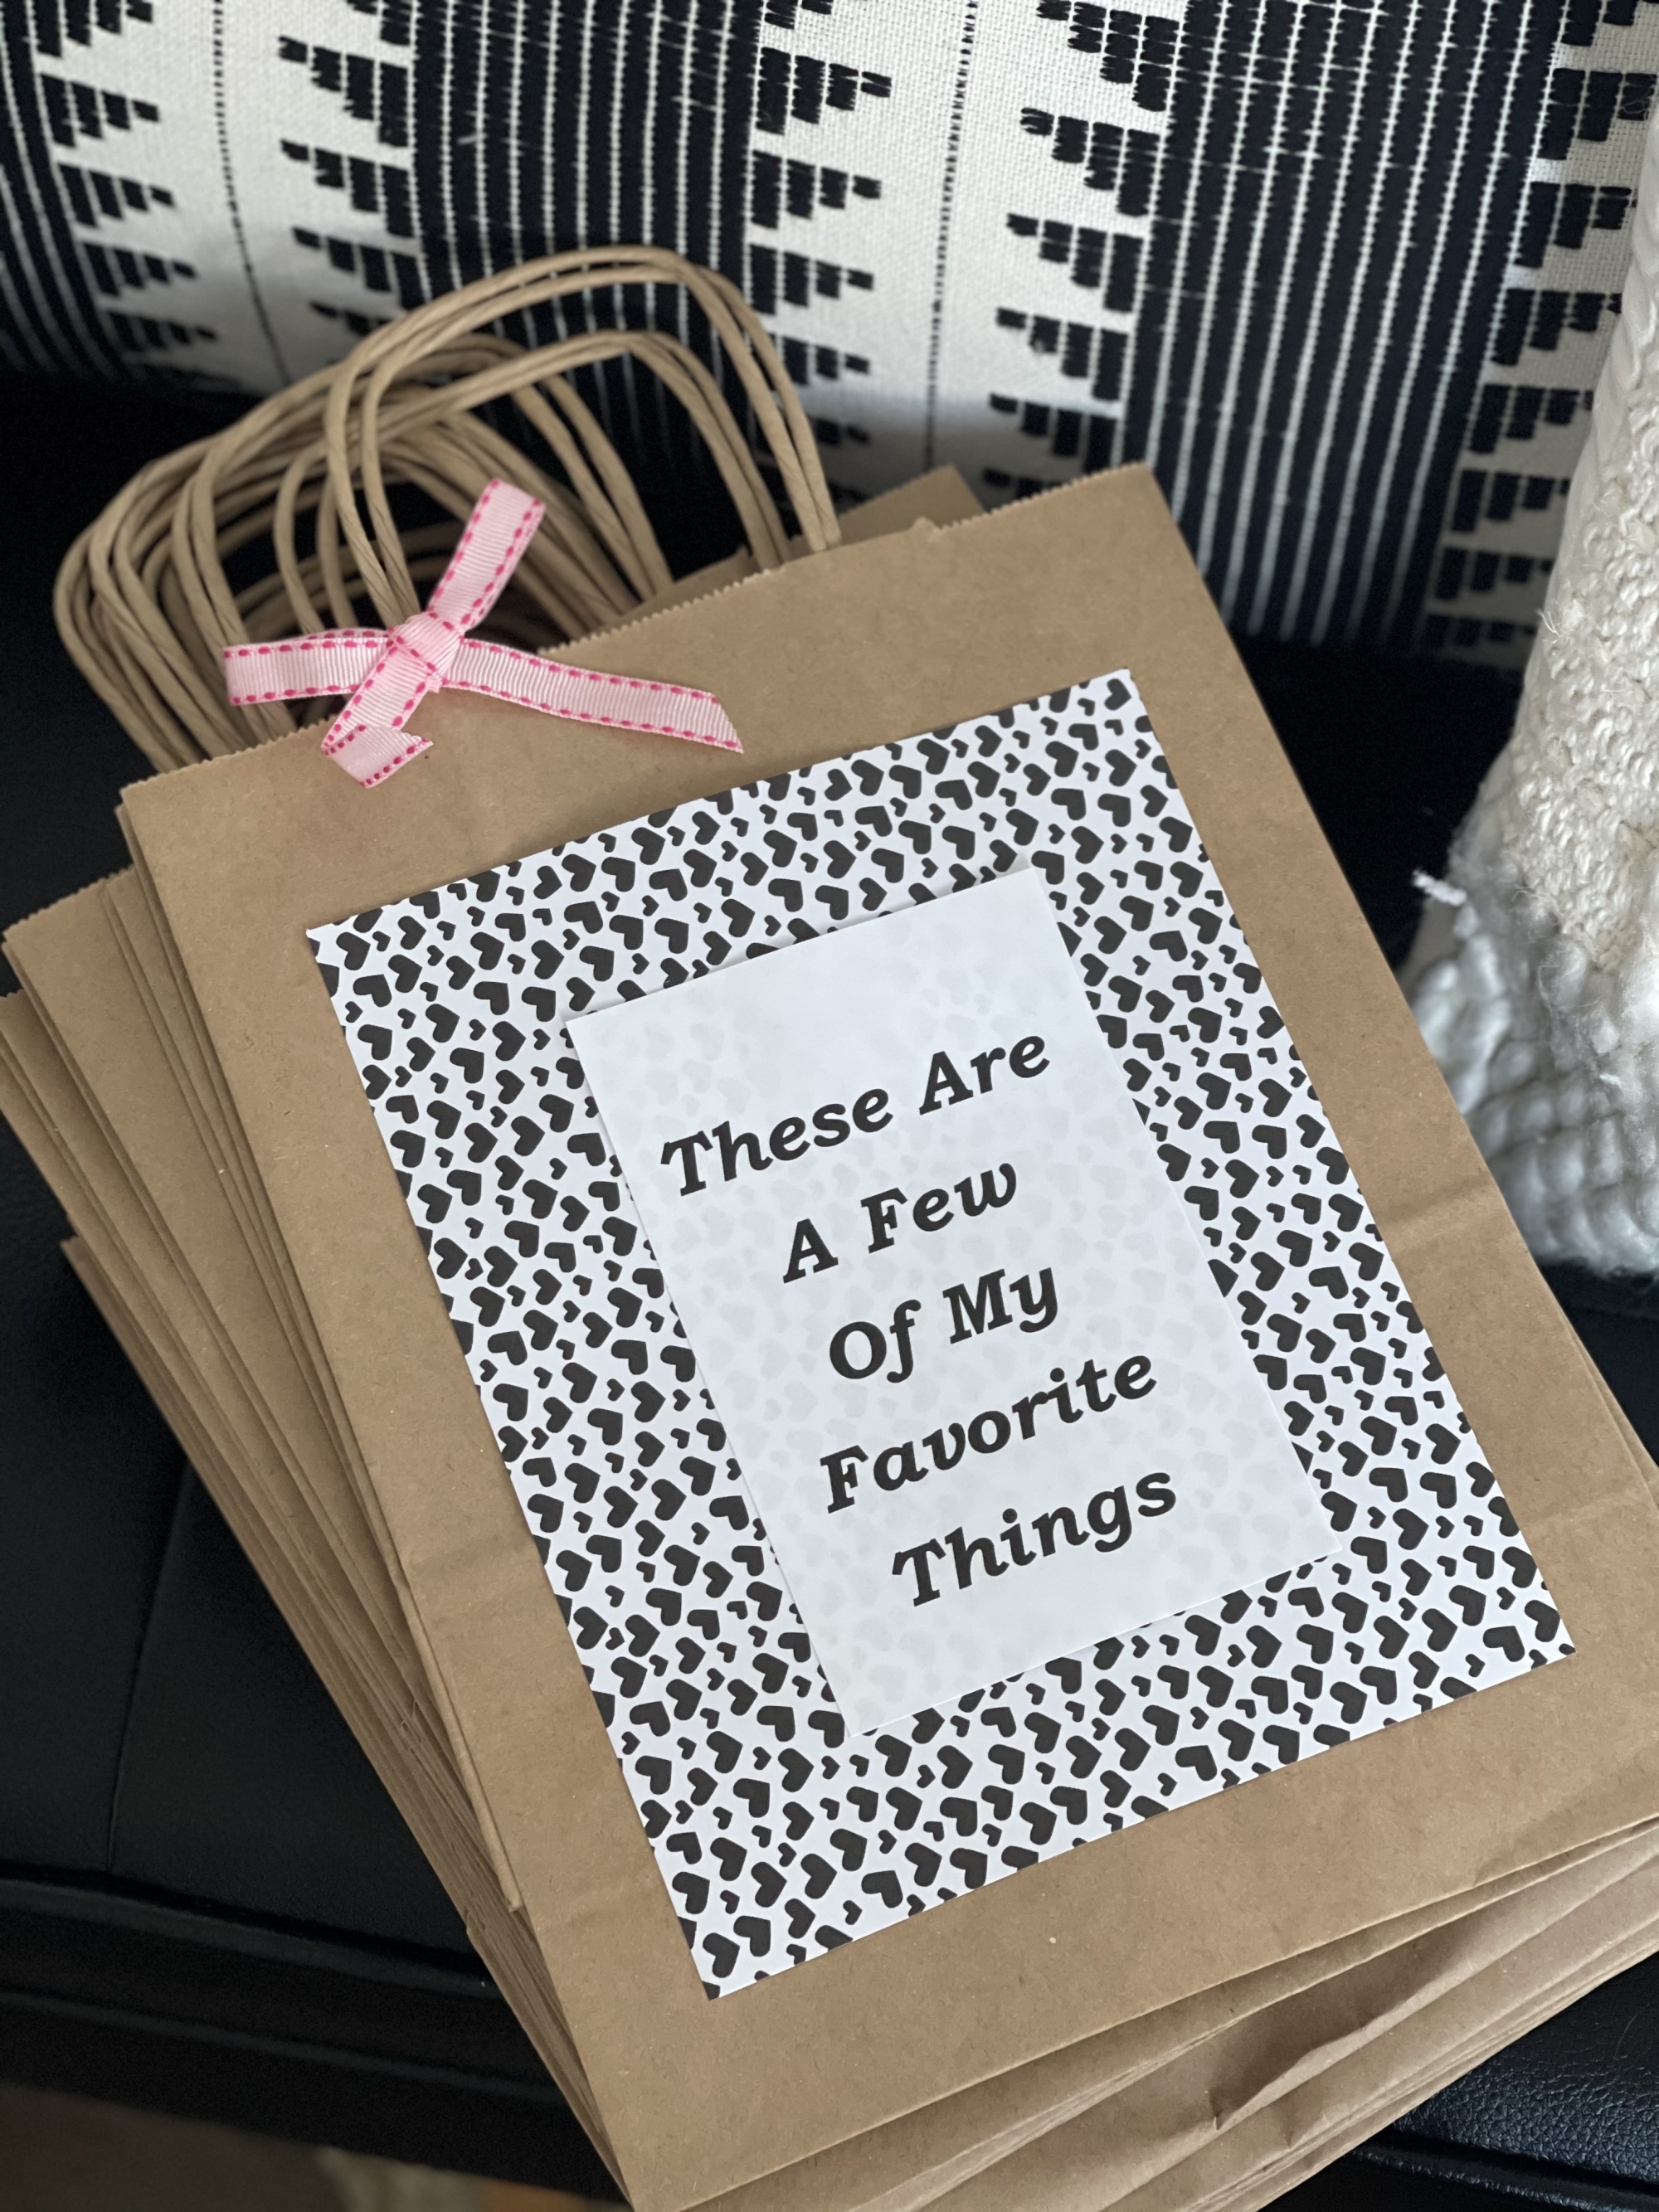 How to plan a Galentine's Day celebration your friends will love with a mimosa bar making These Are A Few of my Favorite Things party bags